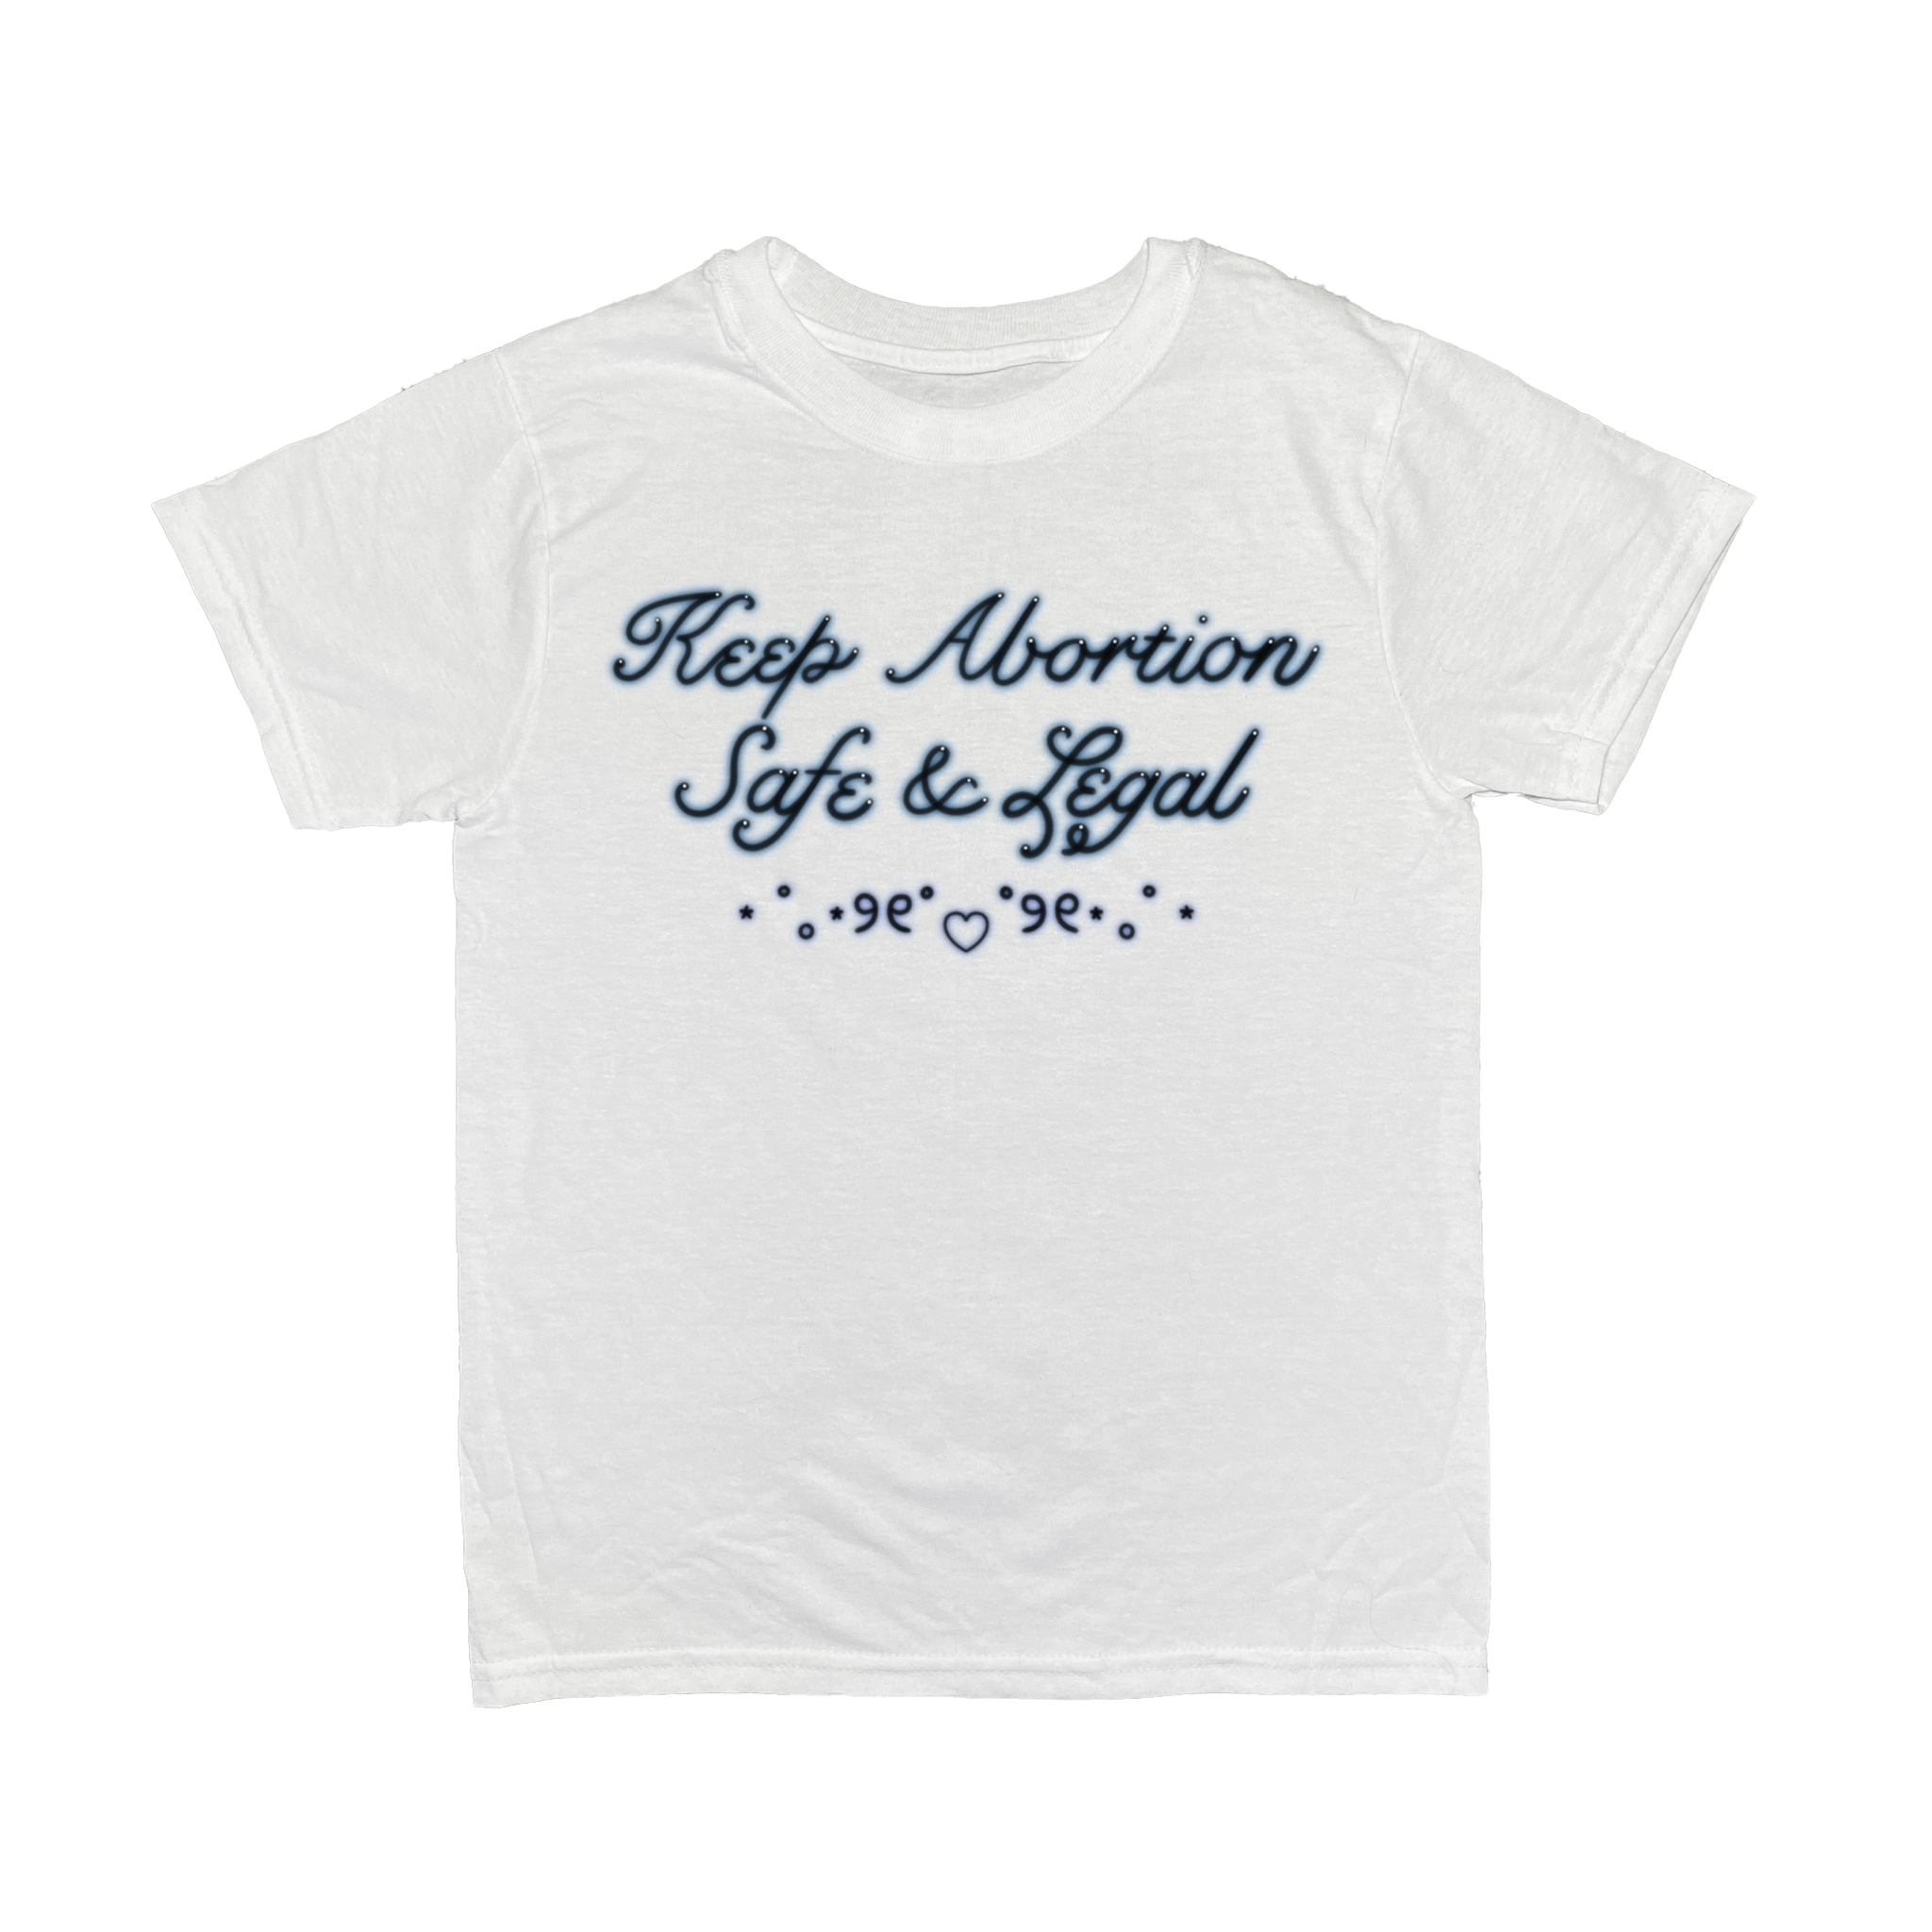 Keep Abortion Safe & Legal Baby Tee